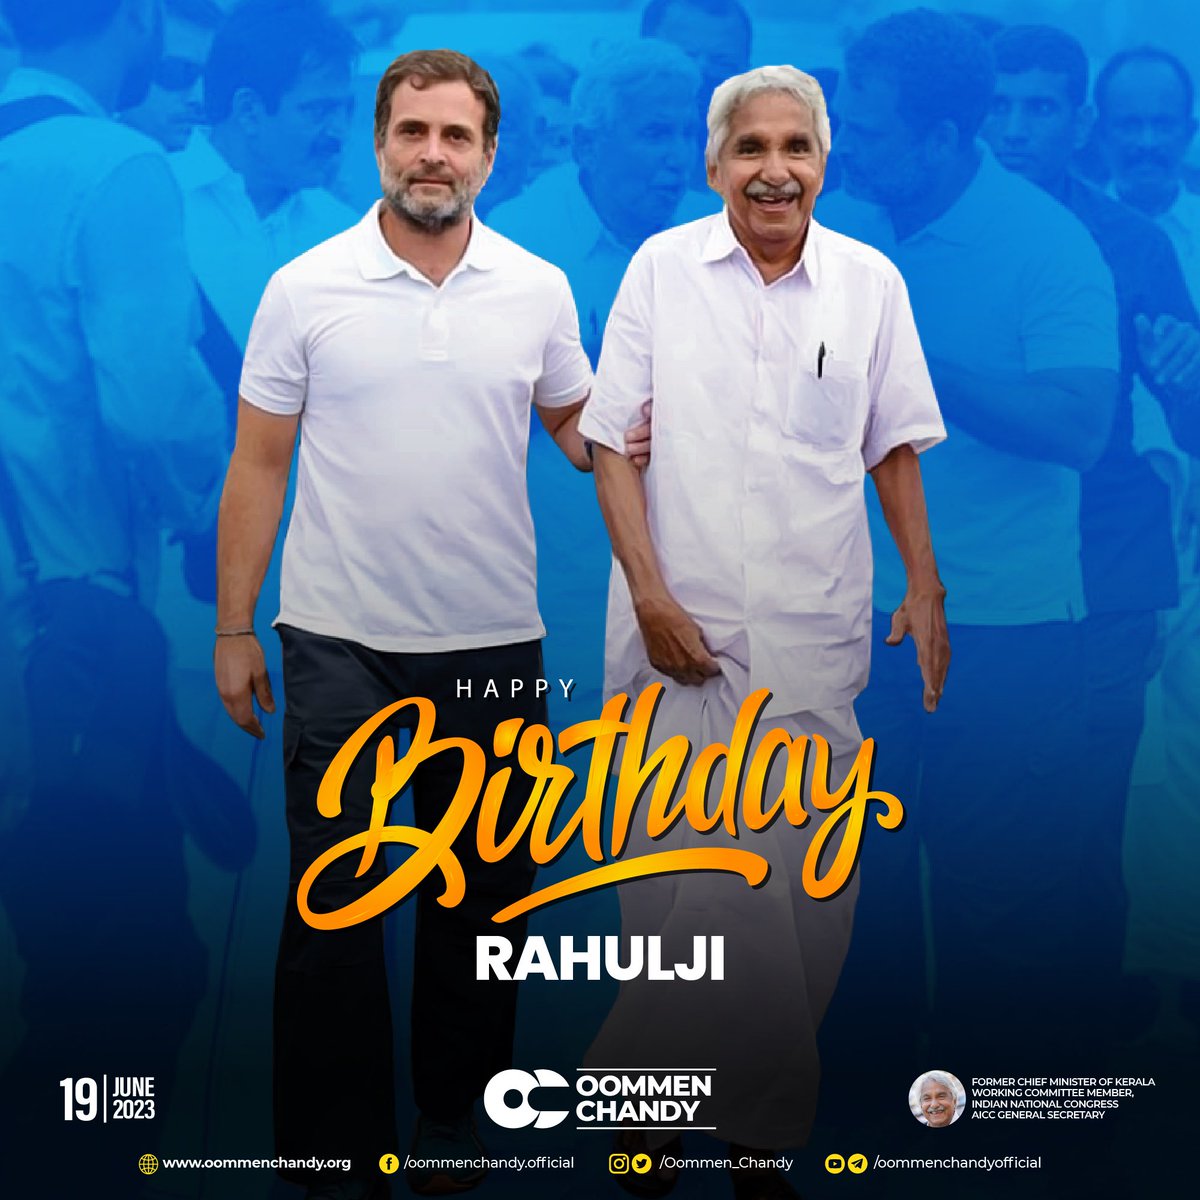 Extending warm Birthday greetings to Shri @RahulGandhi ji, the man who has always believed in spreading love over hatred. The one whose visionary words inspire the youth & bring hope. #HappyBirthdayRahulGandhi